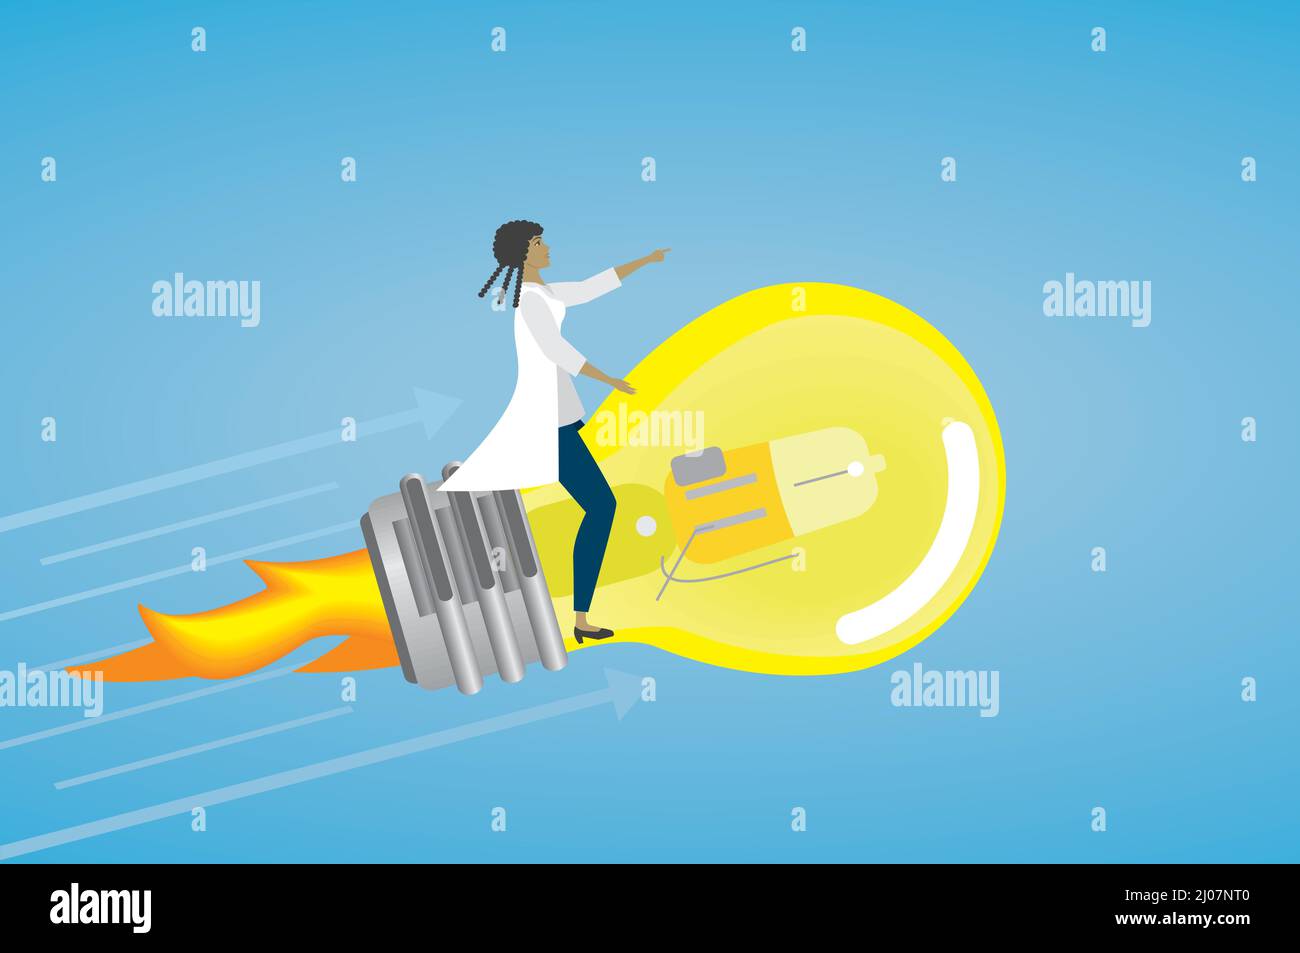 Flying on light bulb rocket. Woman pointing, direction. Vector illustration. Dimension 16:9. Stock Vector